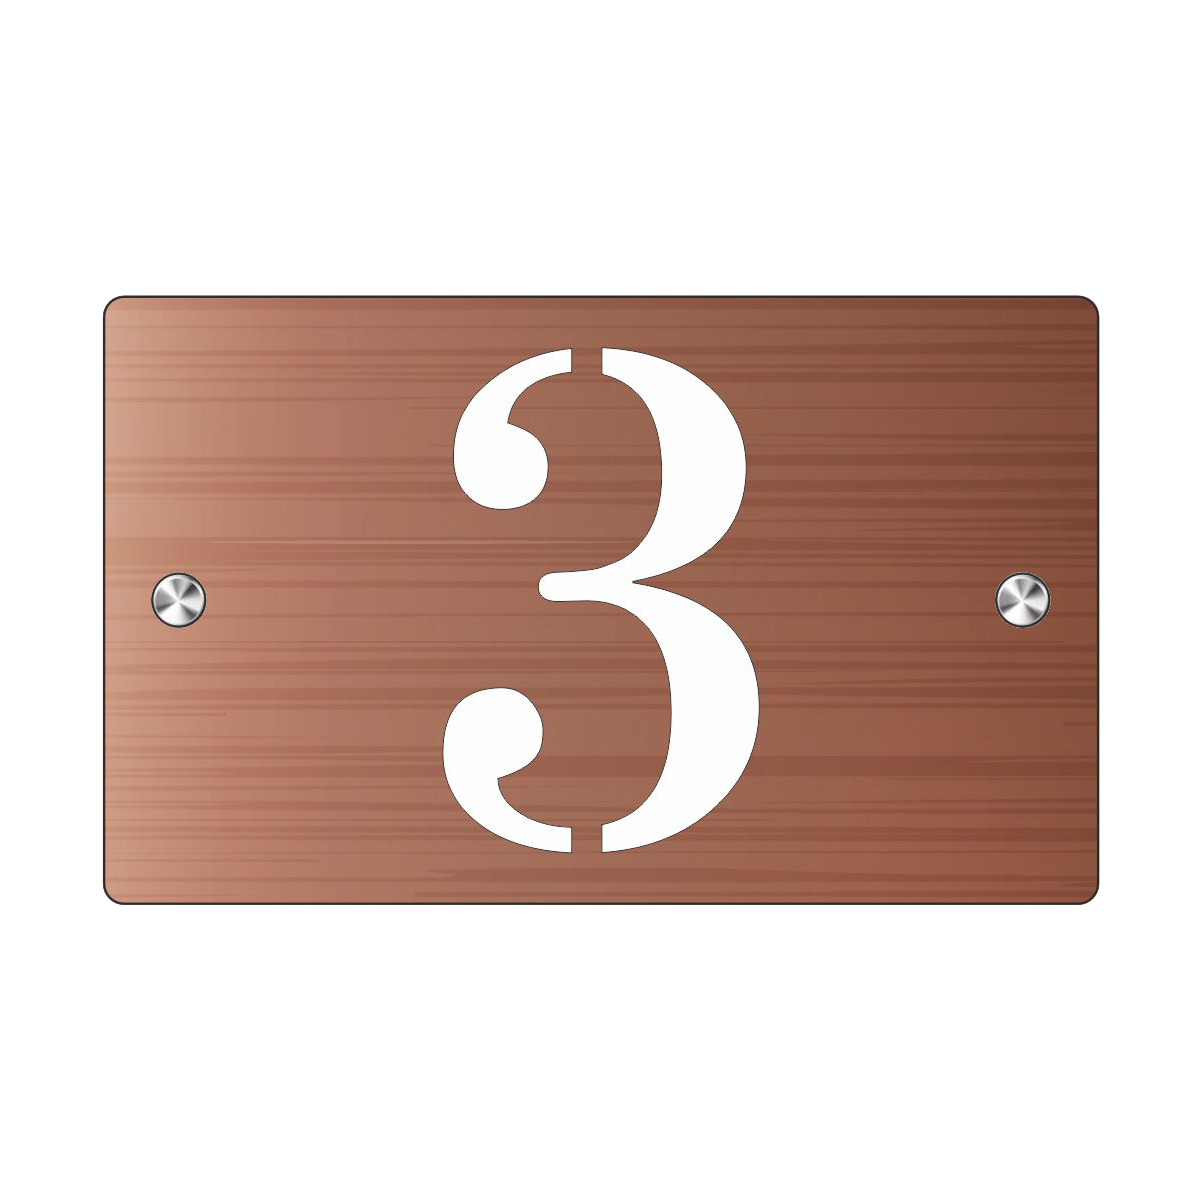 Premium Personalized Street Sign and House Number S1 Mini Brushed Copper White Background 